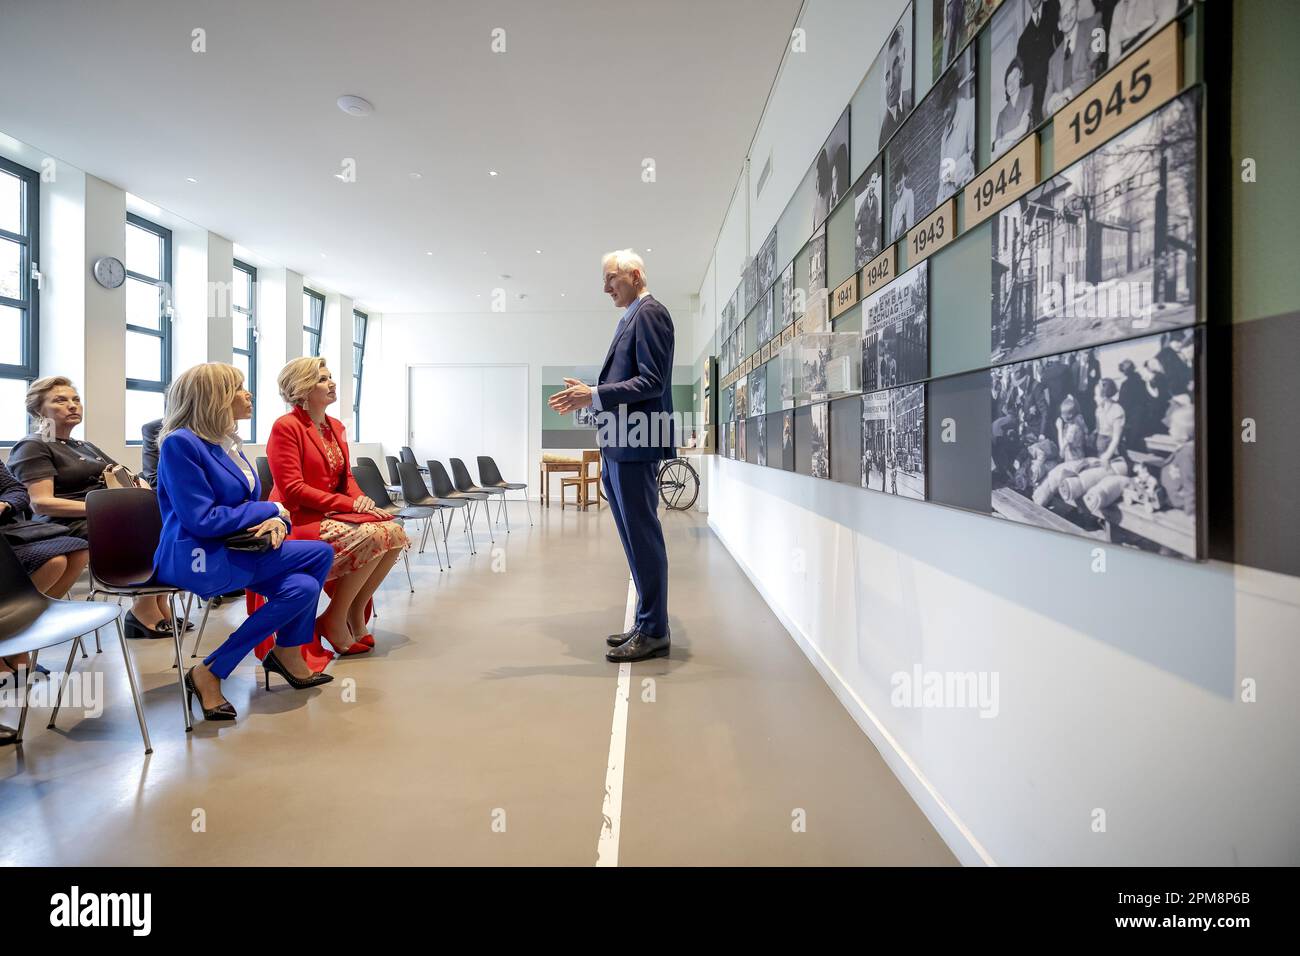 Amsterdam, Netherlands. 12th April, 2023. AMSTERDAM - The French first lady Brigitte Macron and Queen Maxima visit the Anne Frank House. The French presidential couple is paying a two-day state visit to the Netherlands. ANP POOL ROBIN VAN LONKHUIJSEN netherlands out - belgium out Credit: ANP/Alamy Live News Credit: ANP/Alamy Live News Stock Photo